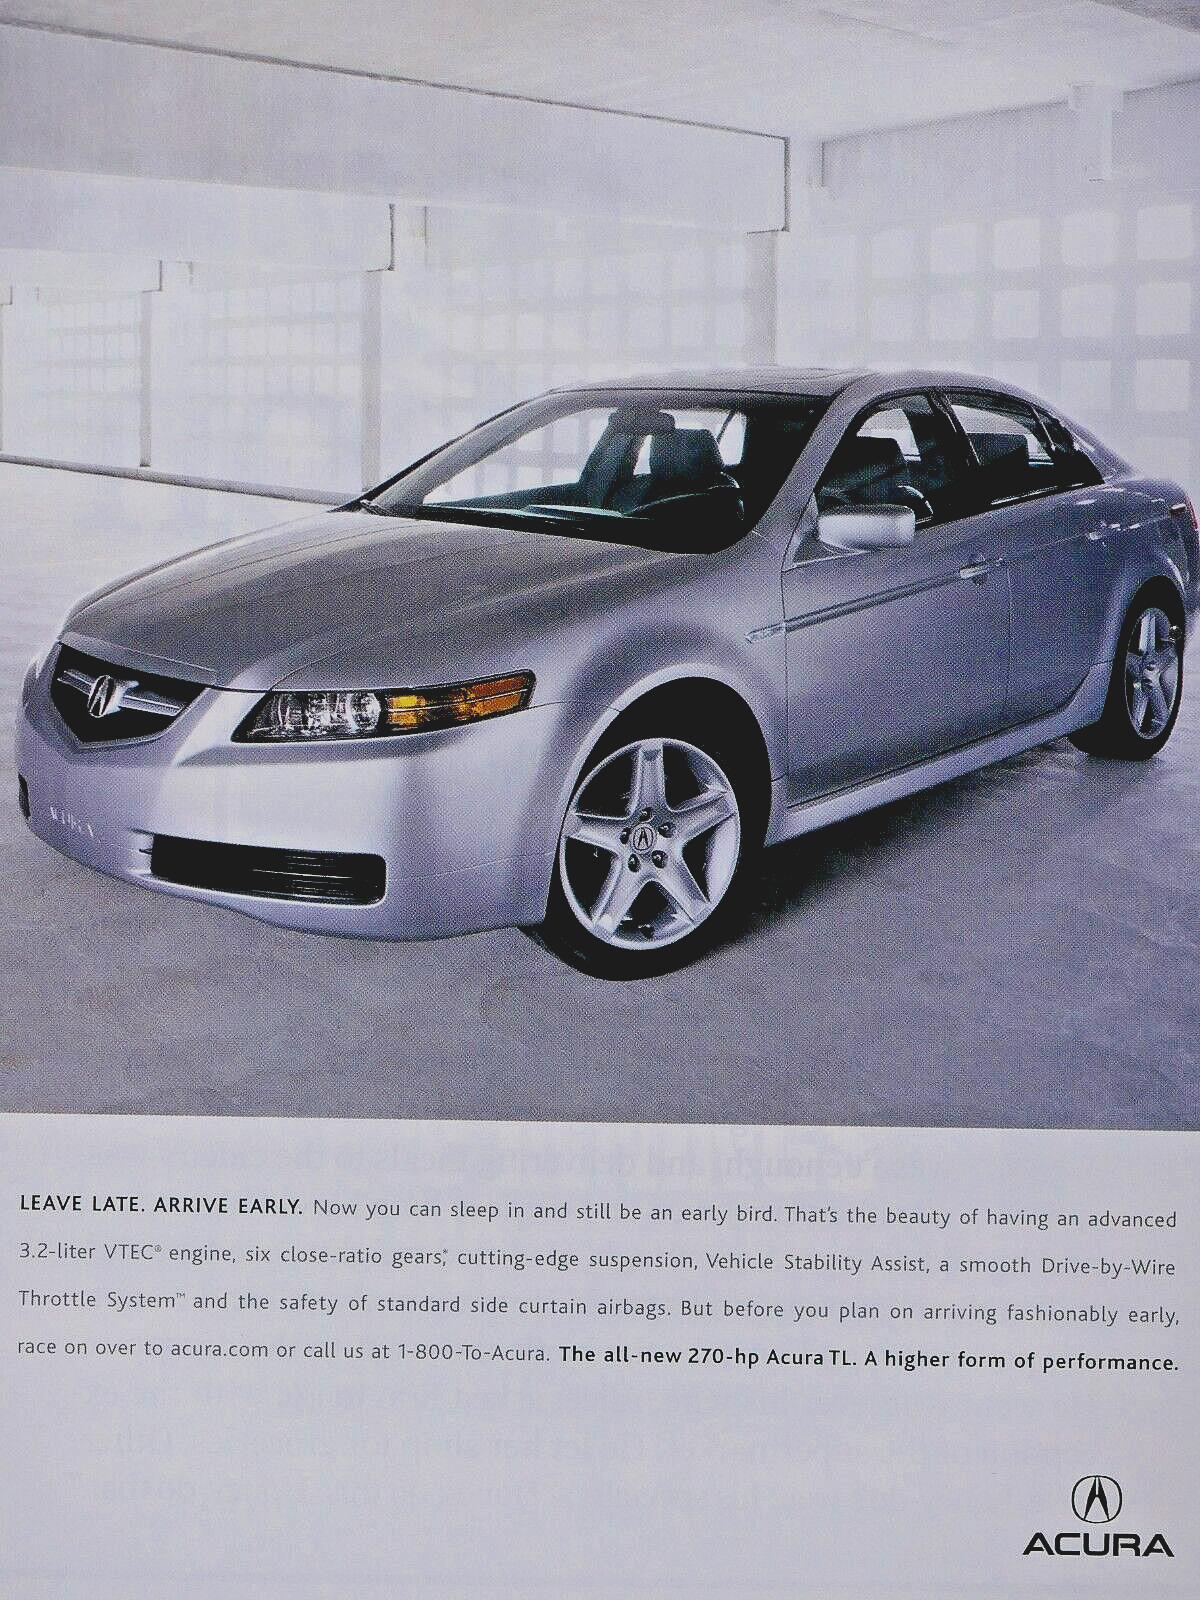 2003 Acura TL  Vintage A Higher Form Of Performance Original Print Ad 8.5 x 11\